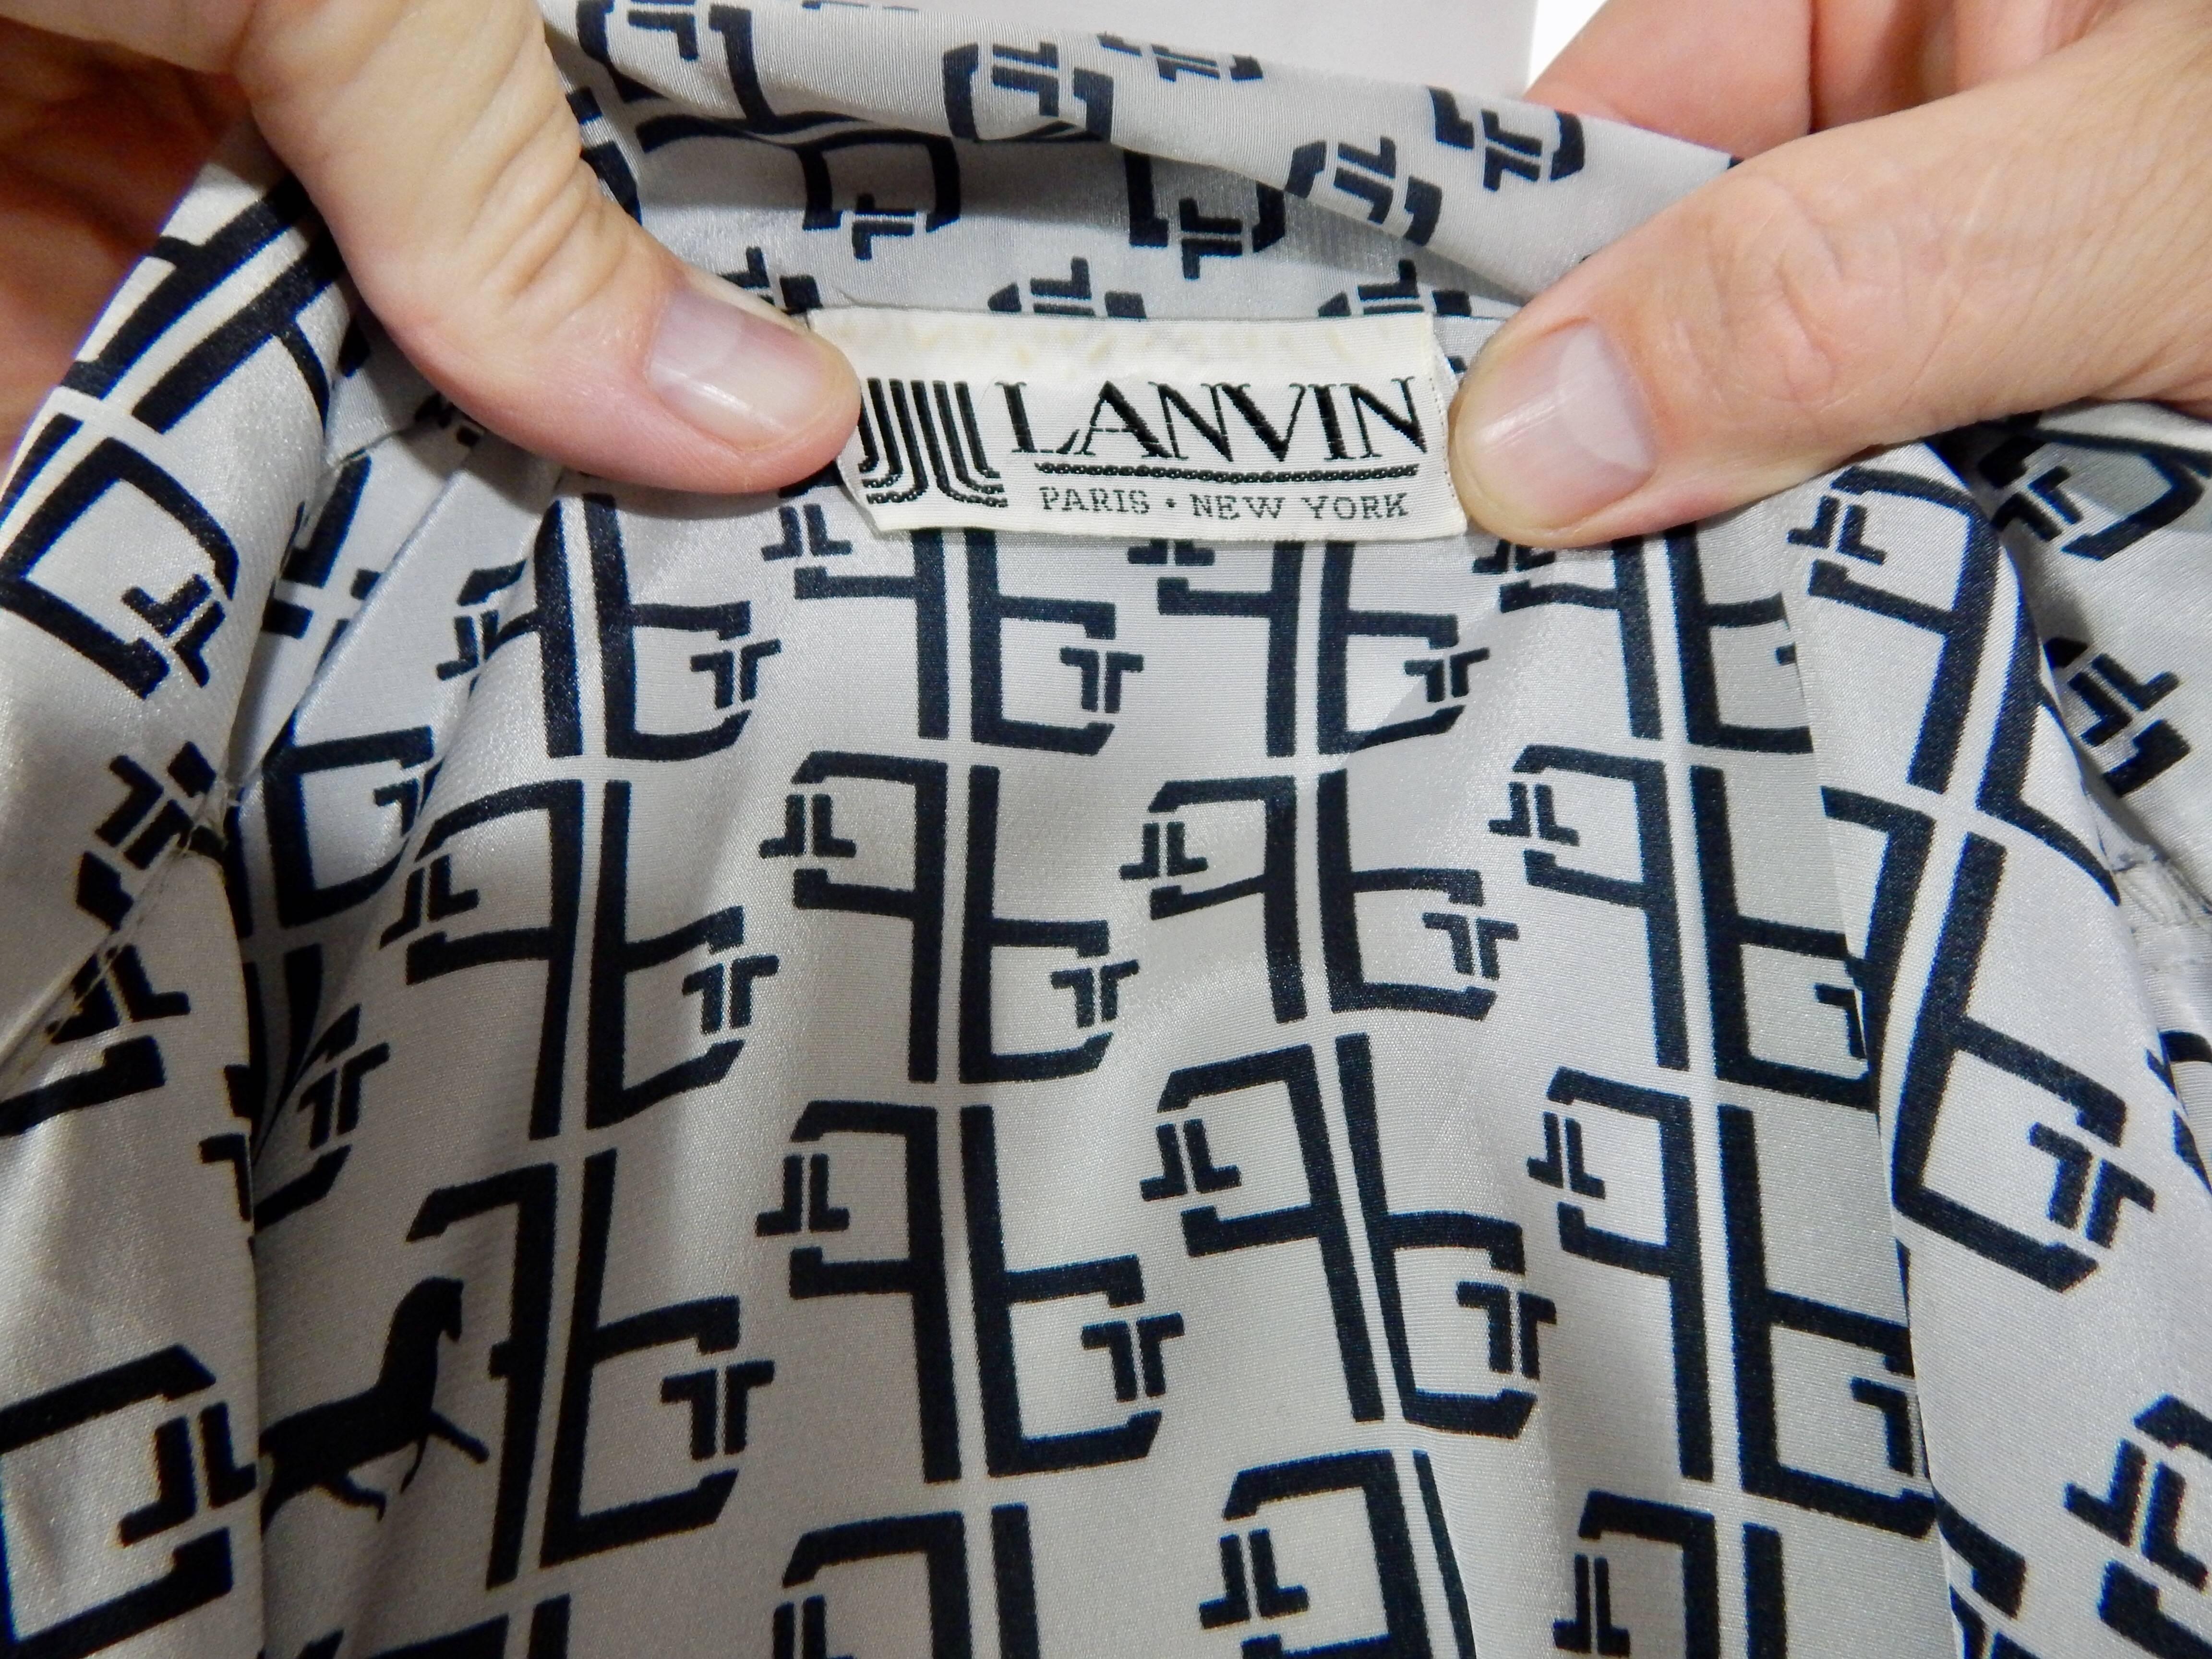 Lanvin Logo Dress In Excellent Condition For Sale In Long Island City, NY